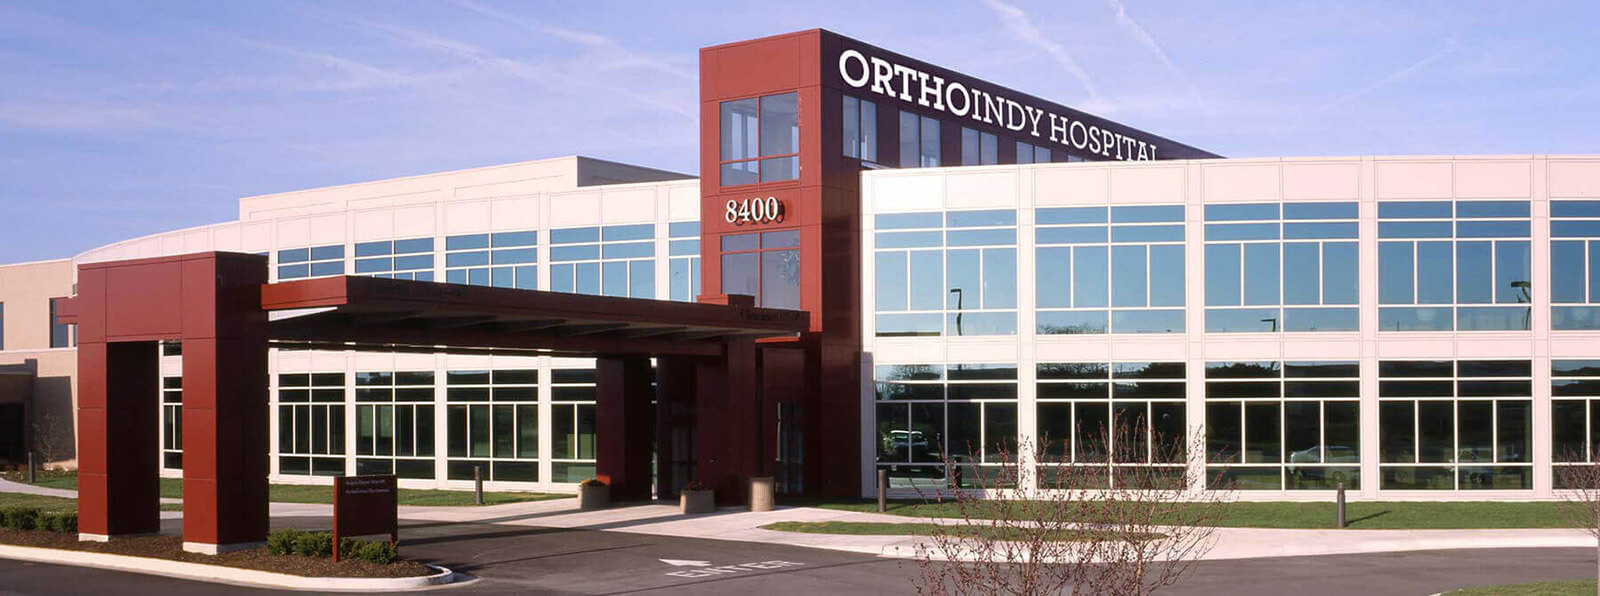 OrthoIndy building